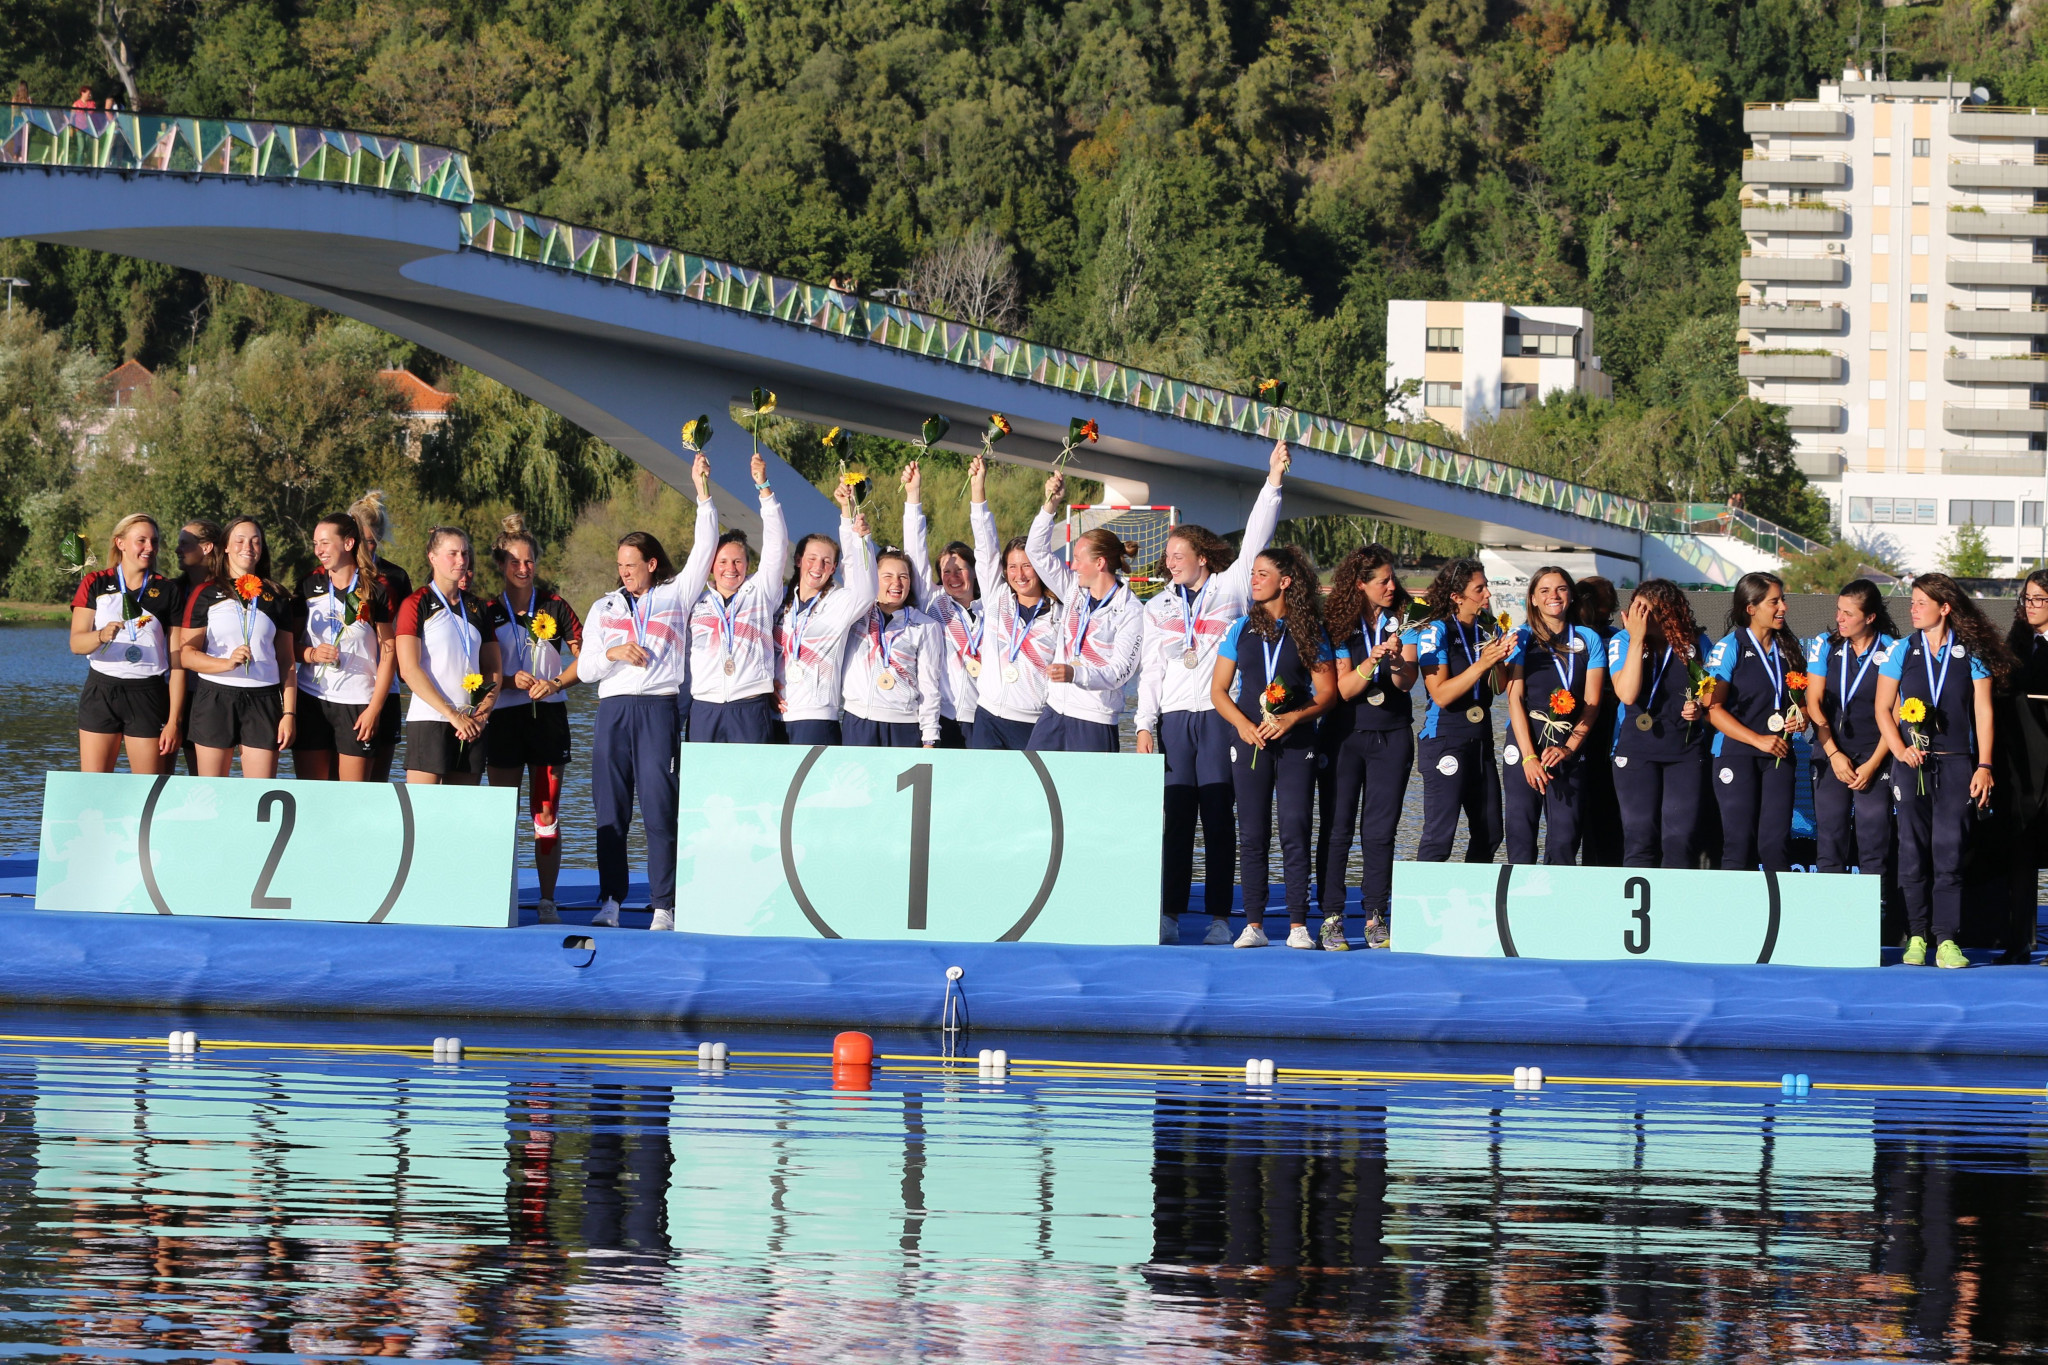 Britain (centre) are the defending women's champions in the European Canoe Polo Championships after their win in Portugal in 2019 ©Getty Images